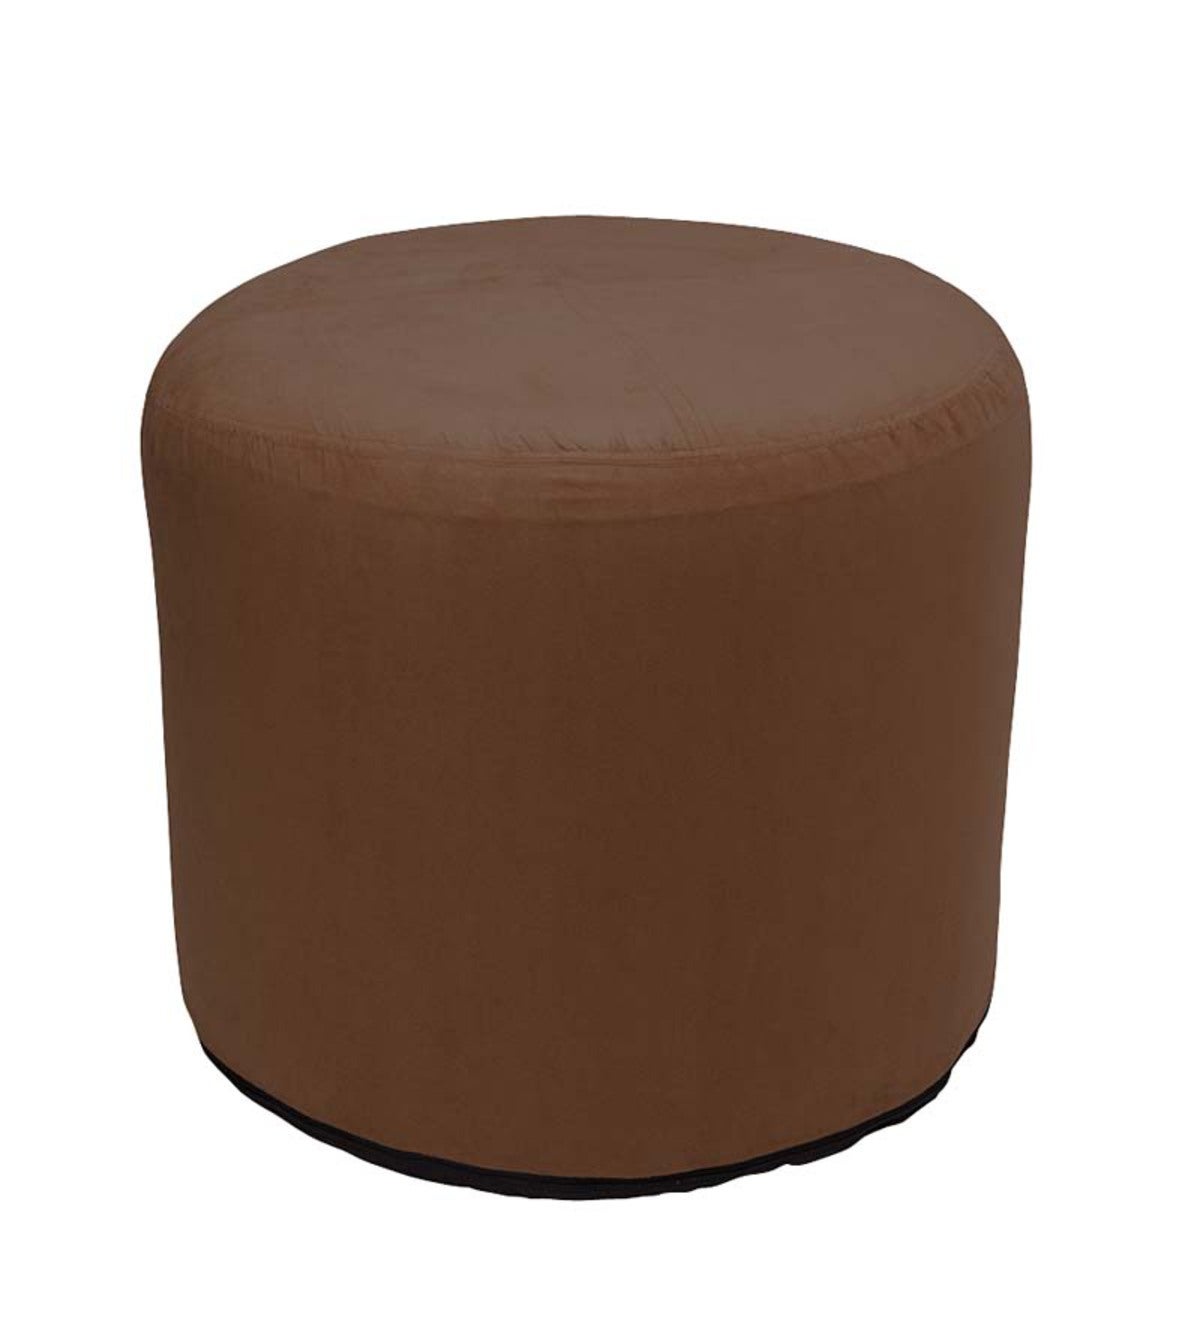 Large Round Inflatable Indoor Ottoman Pouf - Chocolate